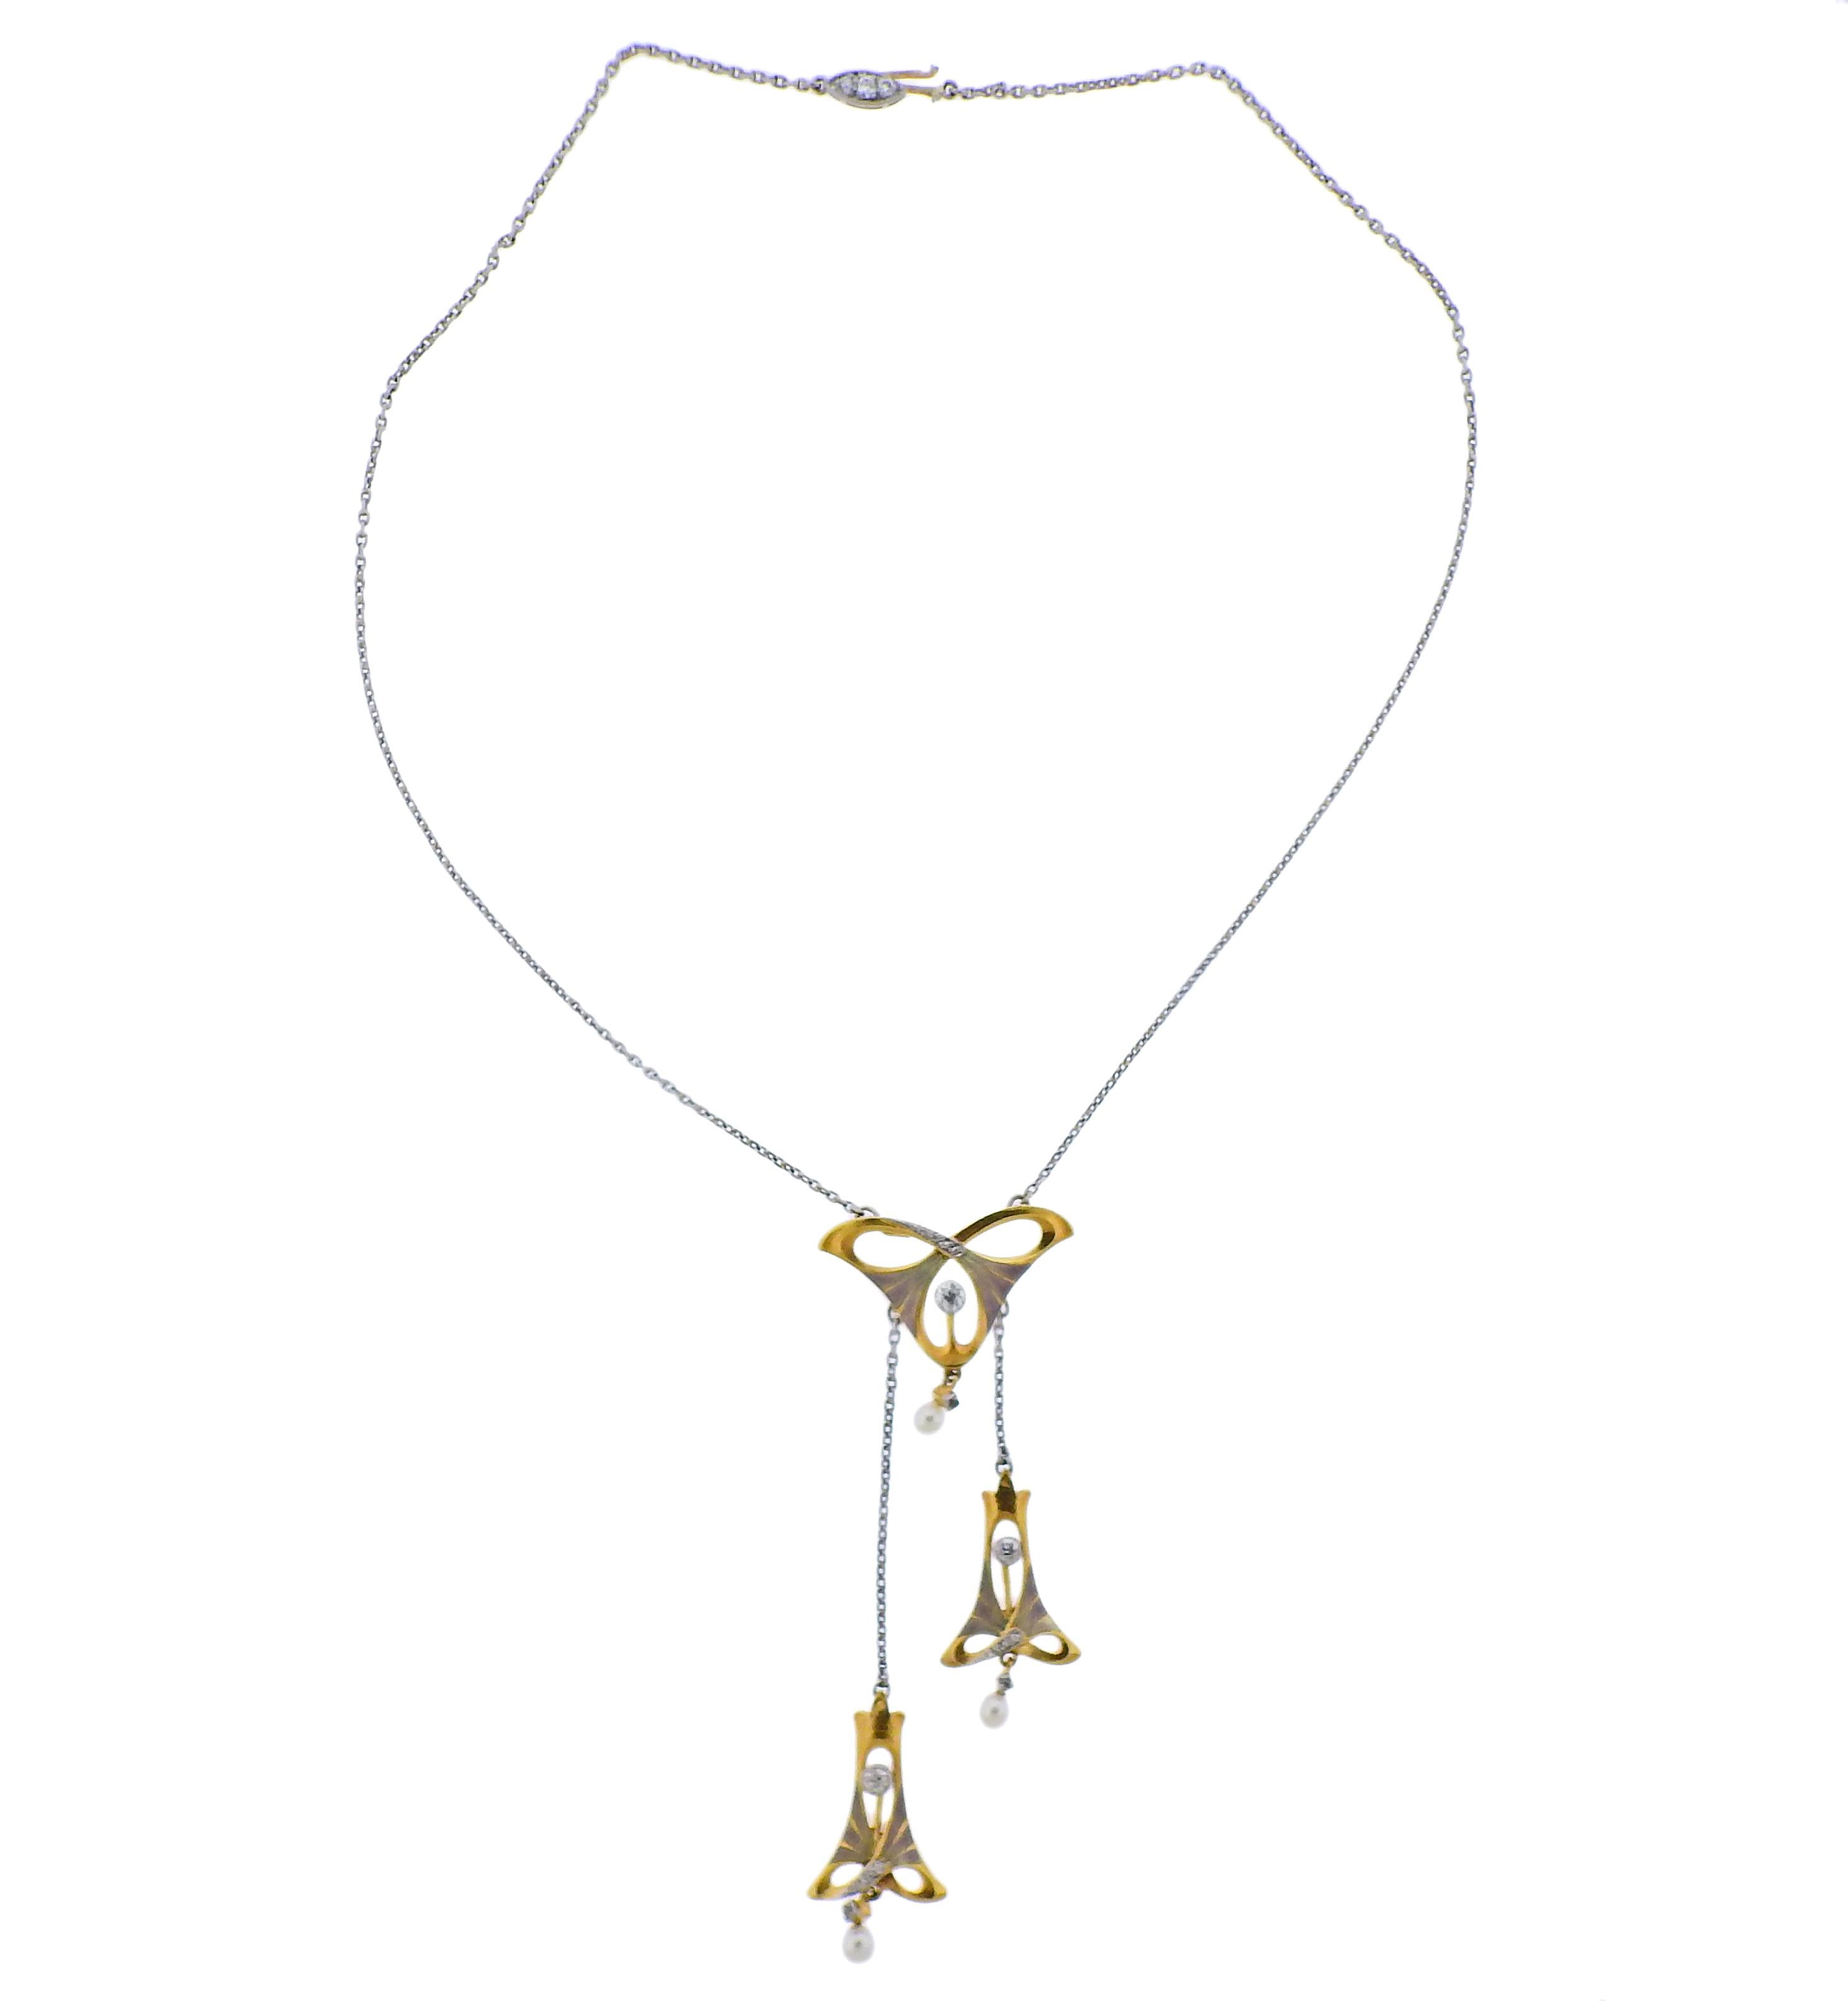 Tiffany & Co Art Nouveau 14k gold and platinum necklace, featuring drop pendant with 3 elements, decorated with Plique-a-Jour enamel, 3.5mm pearls and approx. 0.40cts in diamonds. Necklace is 15